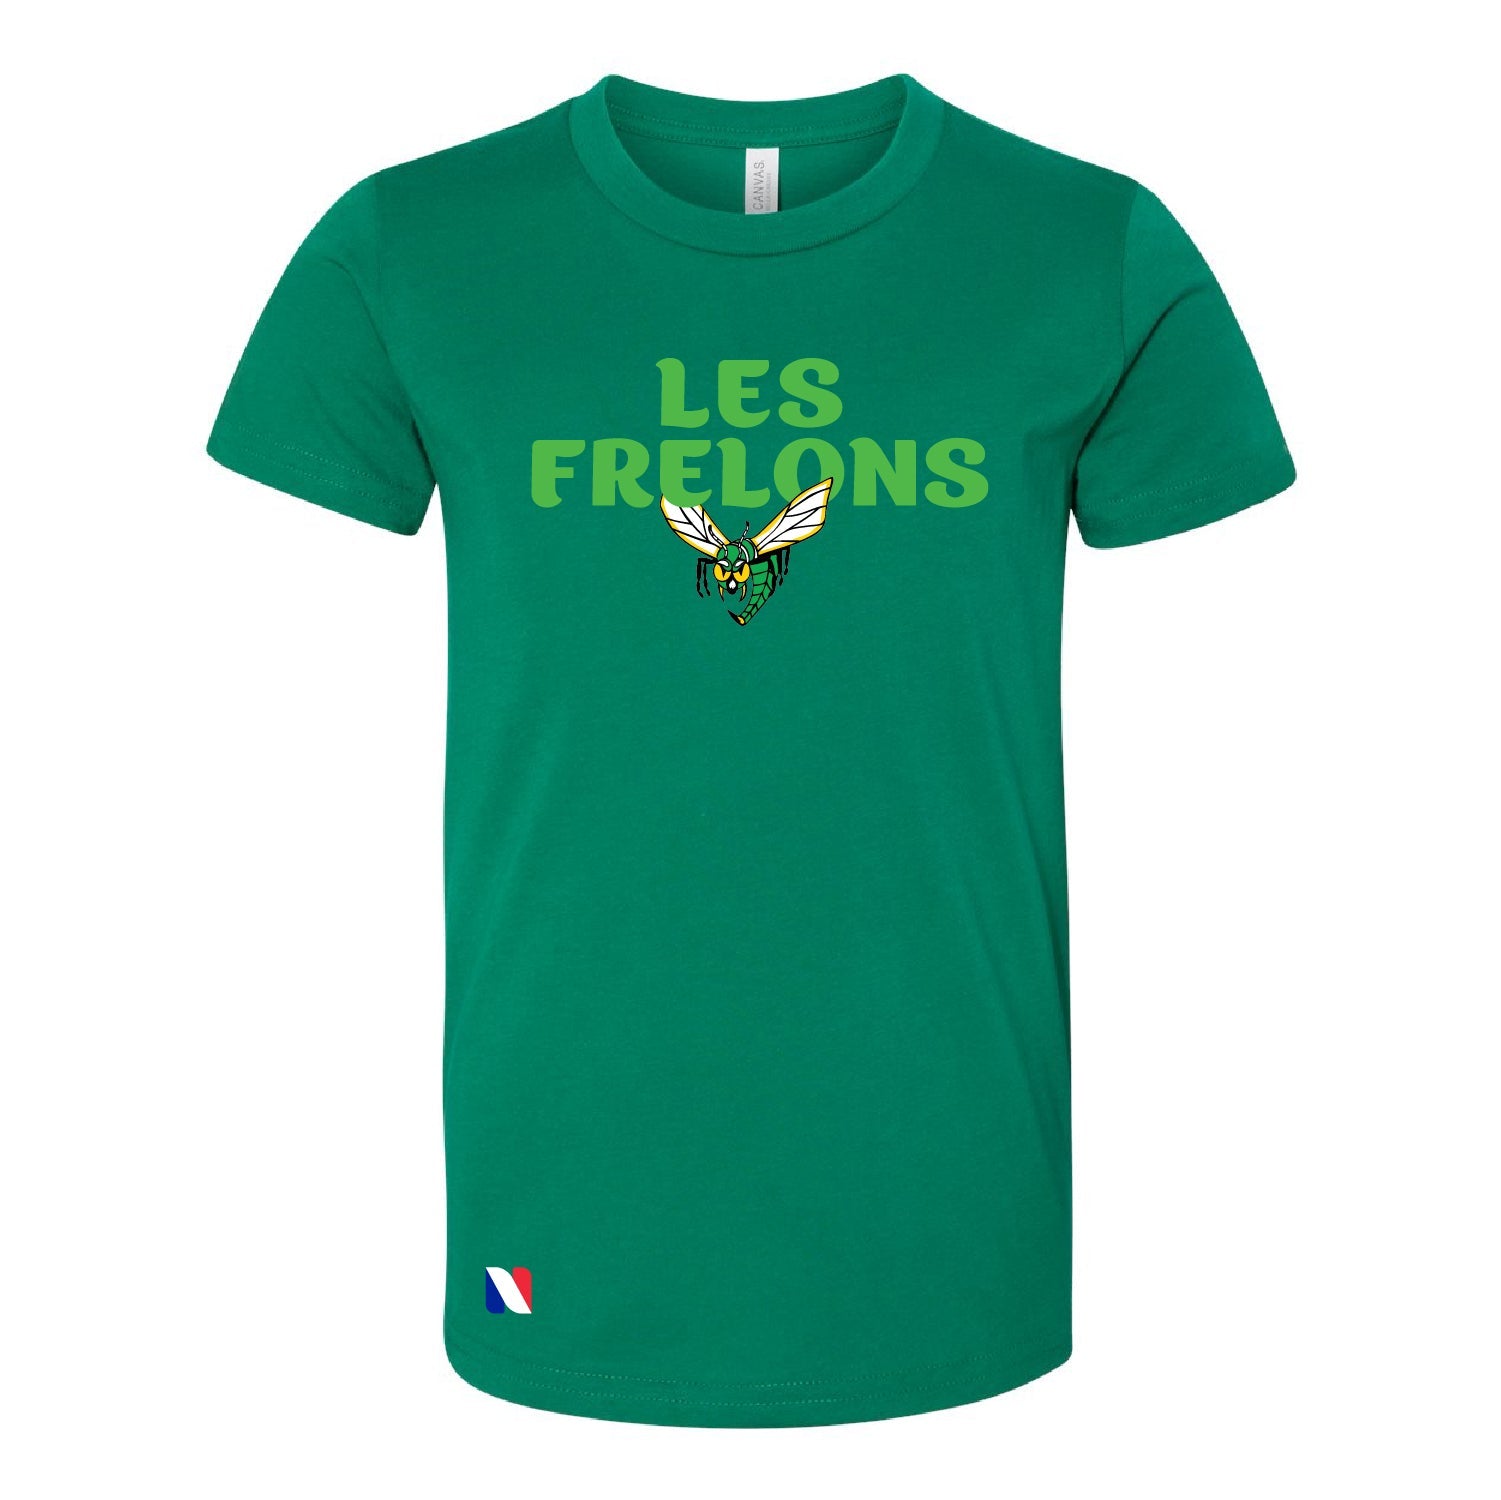 LES FRELONS – YOUTH JERSEY TEE - DSP On Demand